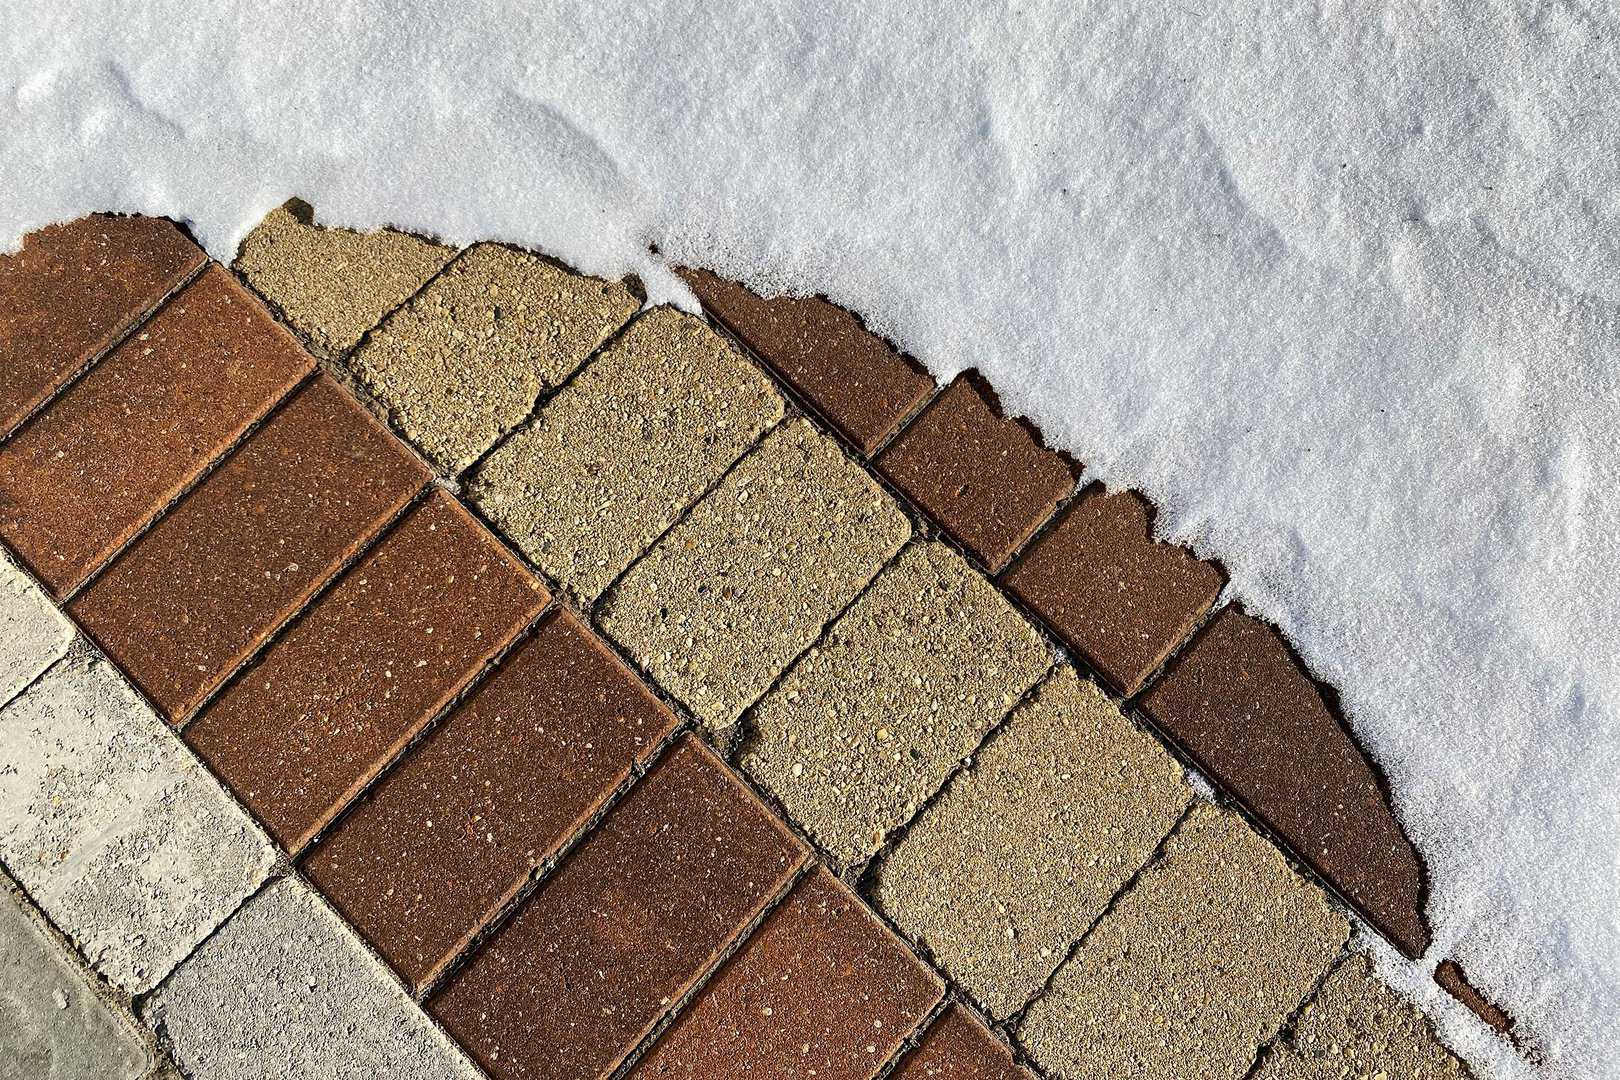 How to properly de-ice your brick pavers